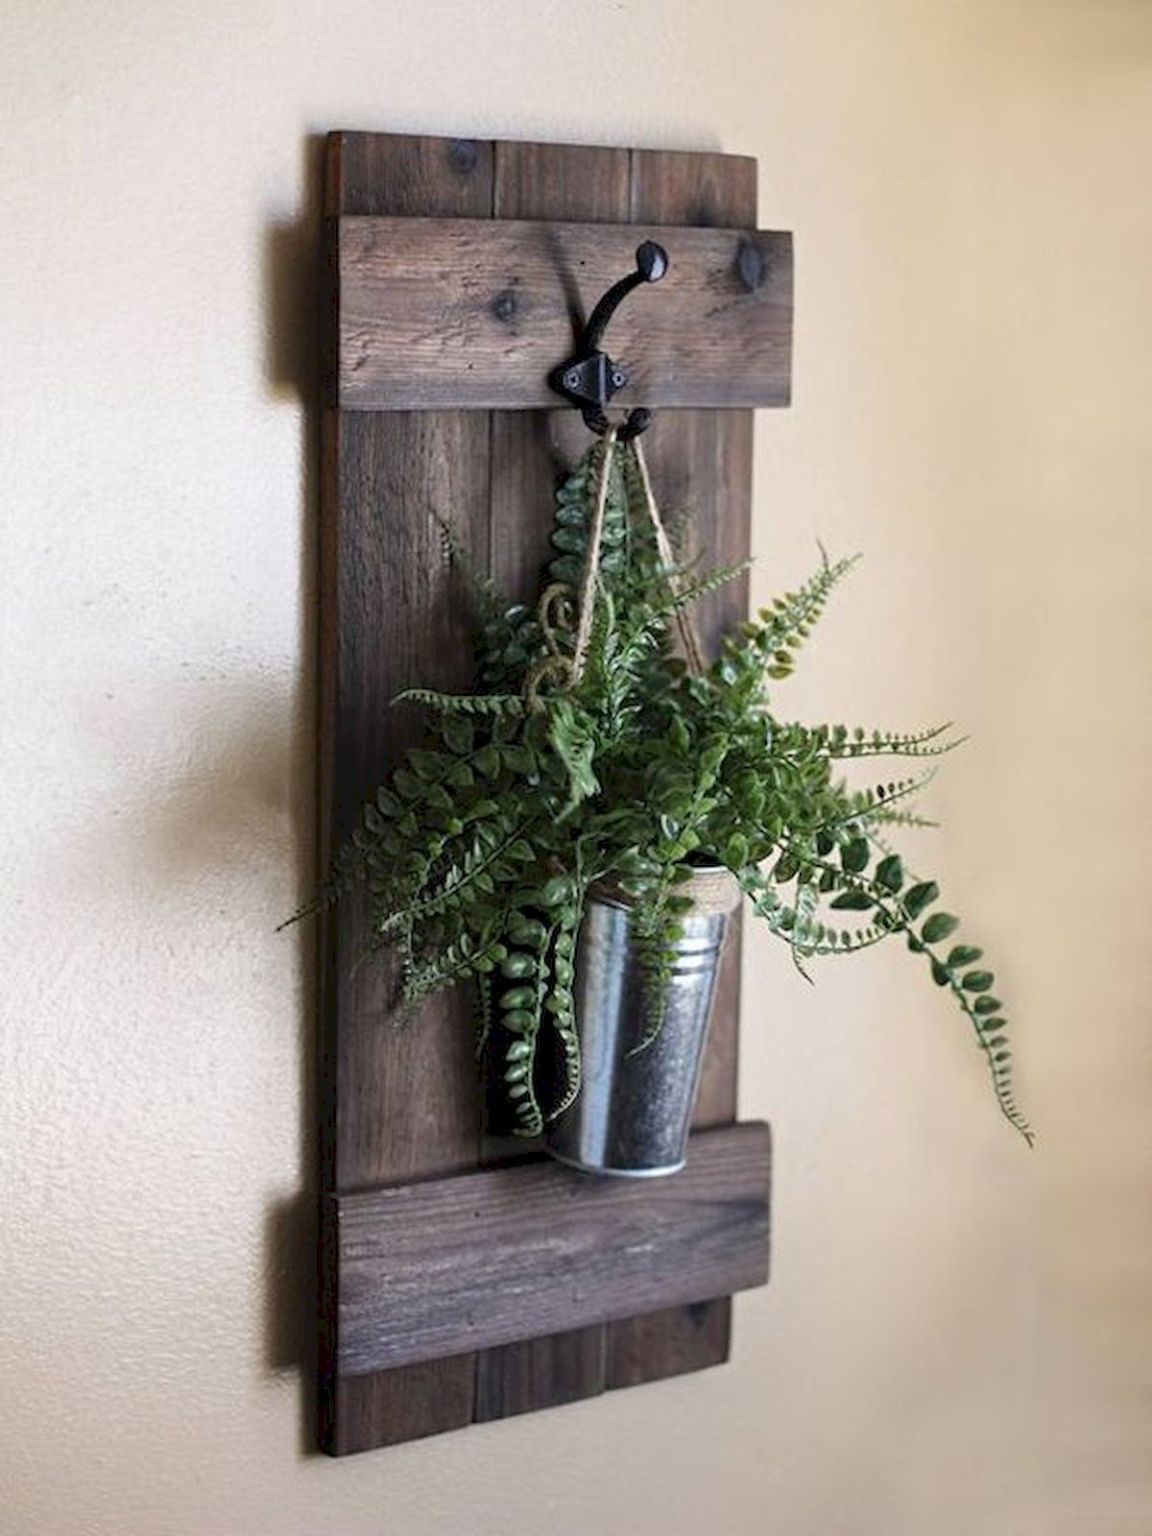 30 Cheap and Easy Rustic DIY Home Decor Ideas to Try - Anchordeco.com